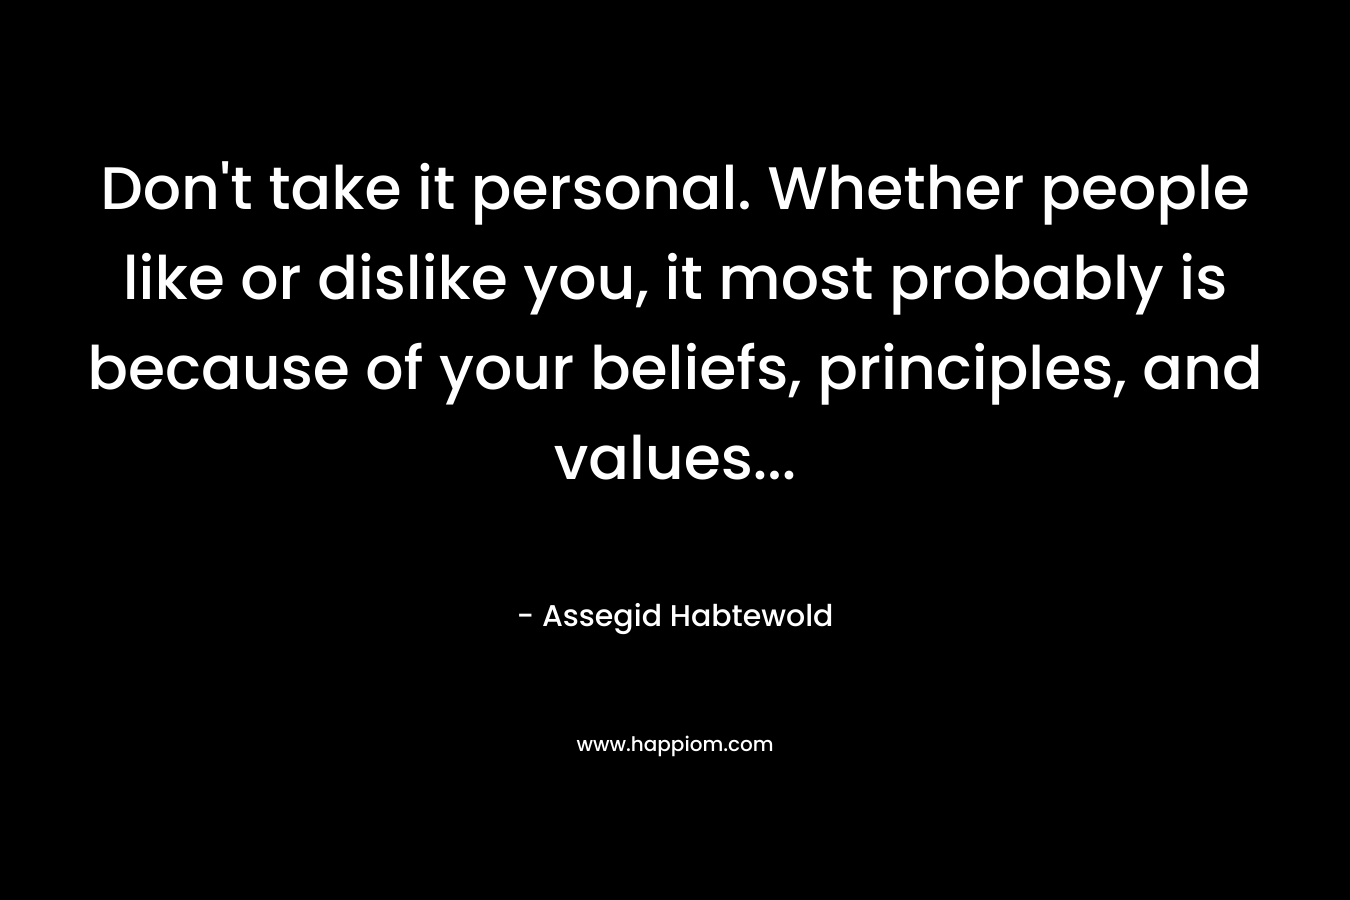 Don’t take it personal. Whether people like or dislike you, it most probably is because of your beliefs, principles, and values… – Assegid Habtewold